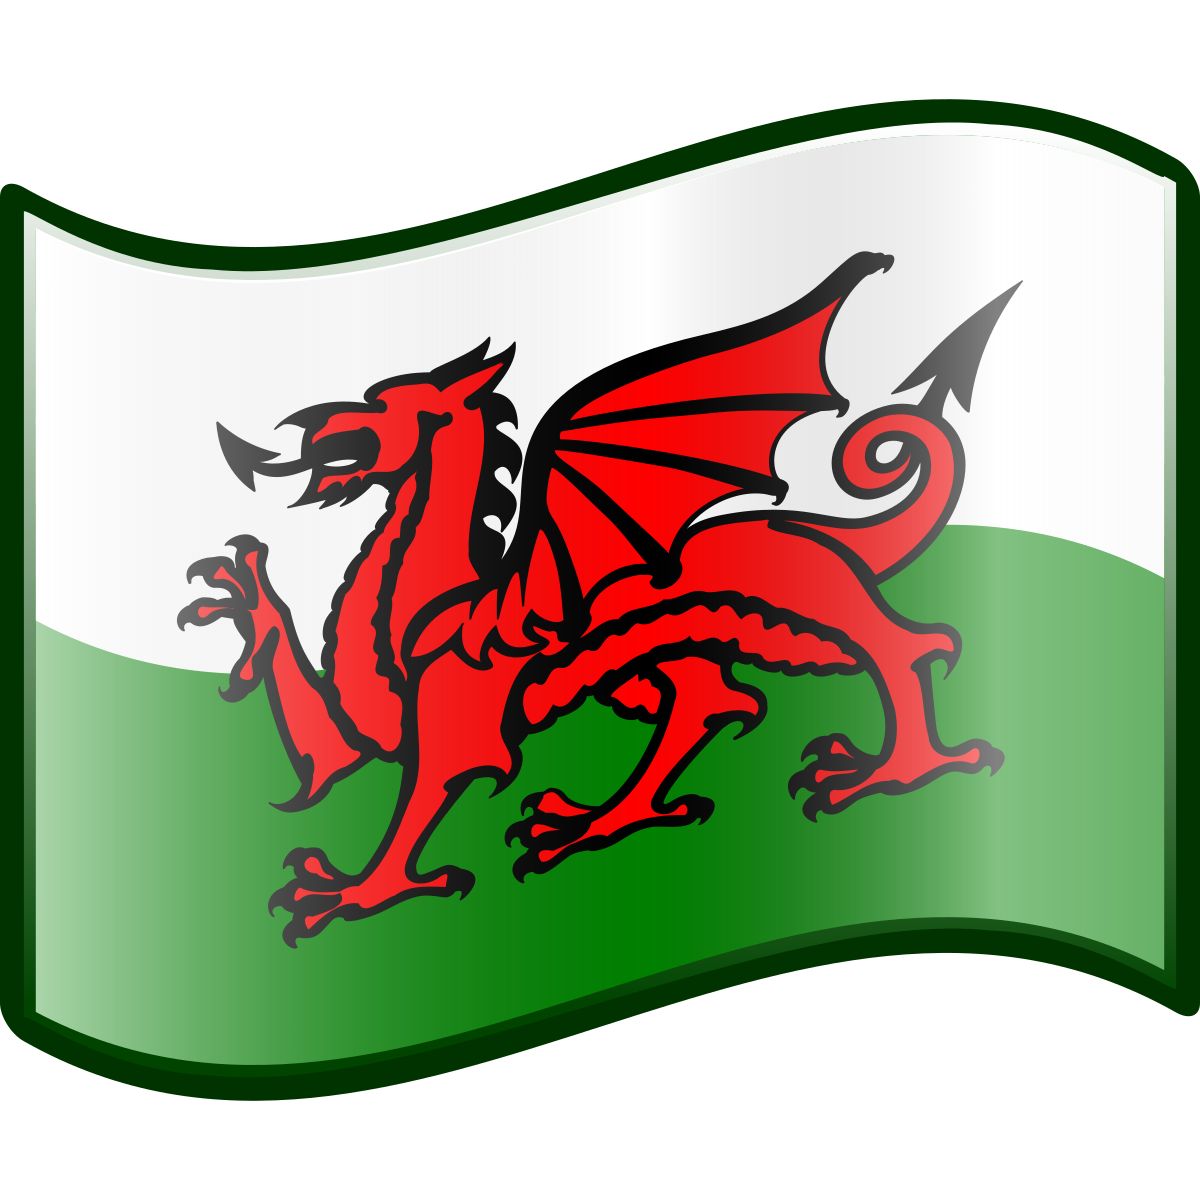 Download File:Nuvola welsh flag simplified.svg - Wikipedia